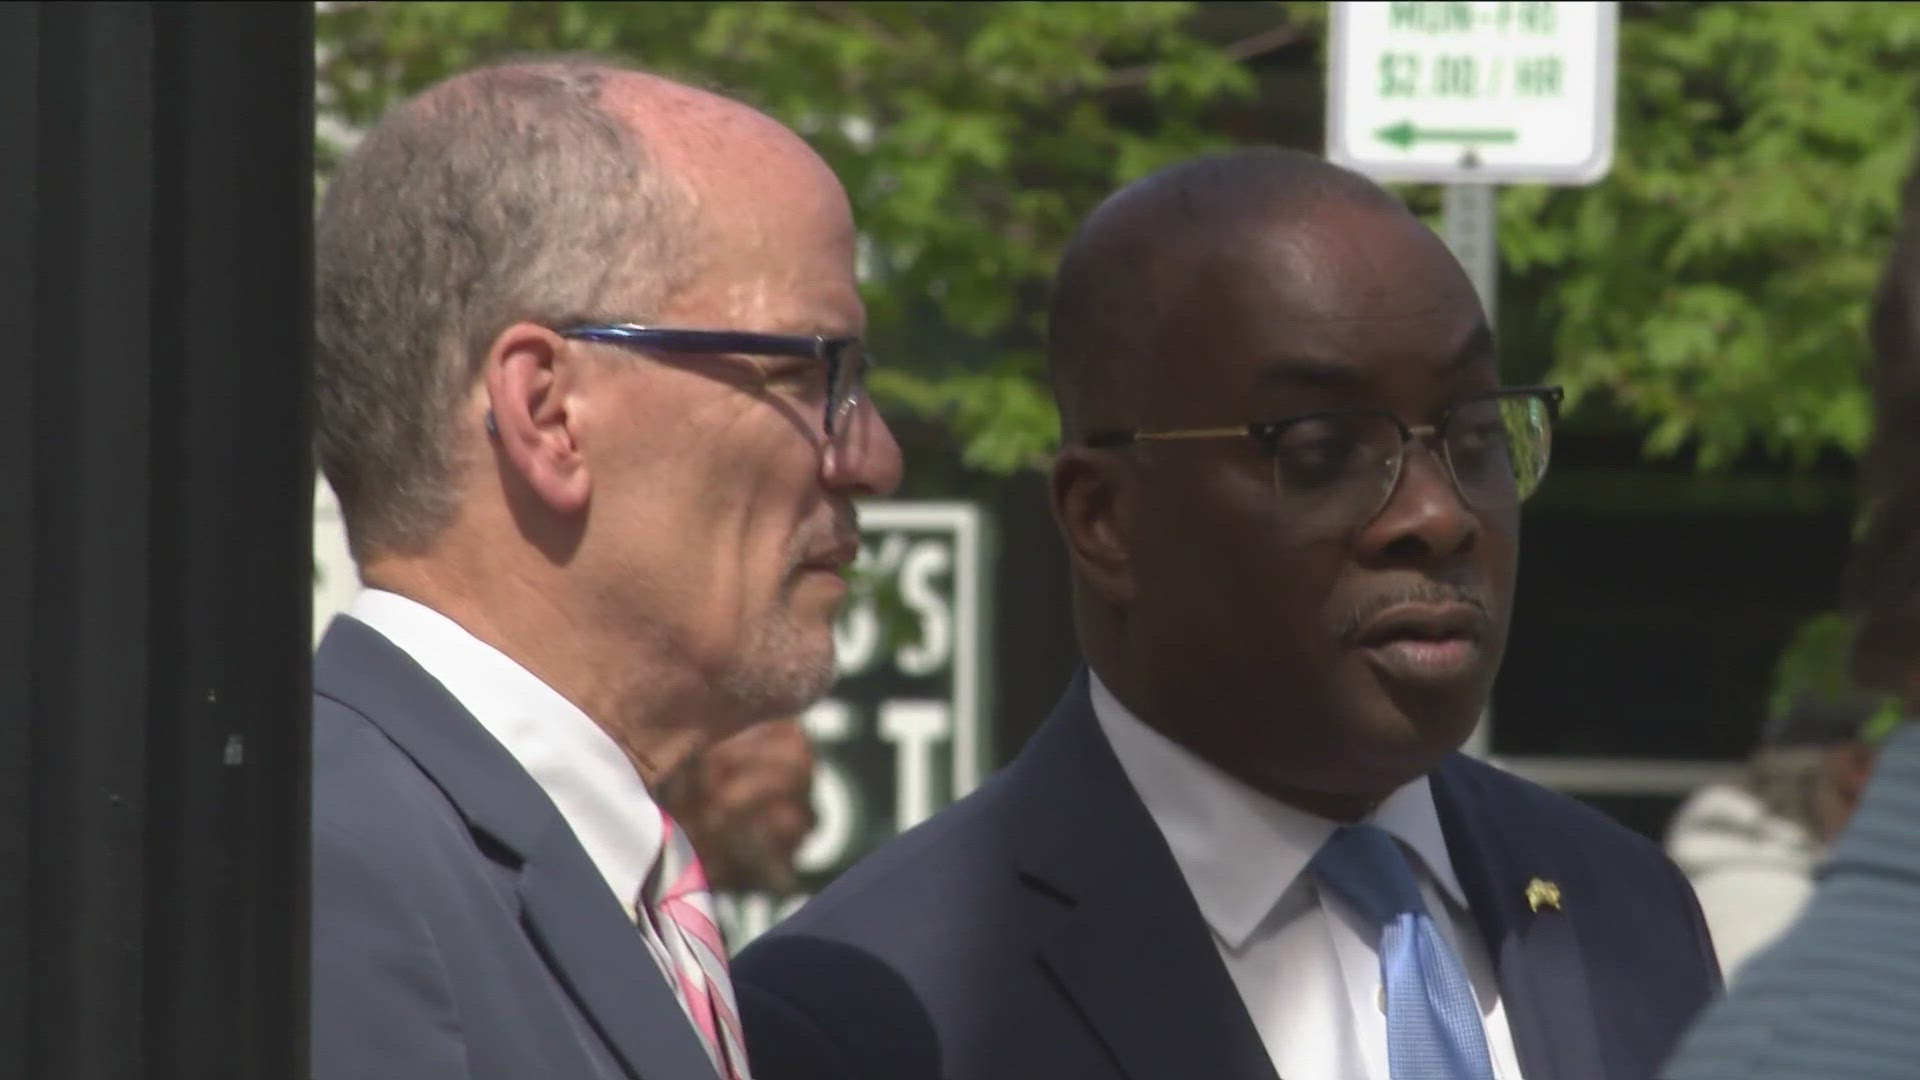 President Biden's advisor Tom Perez visited buffalo Tuesday to talk about several infrastructure projects in the city